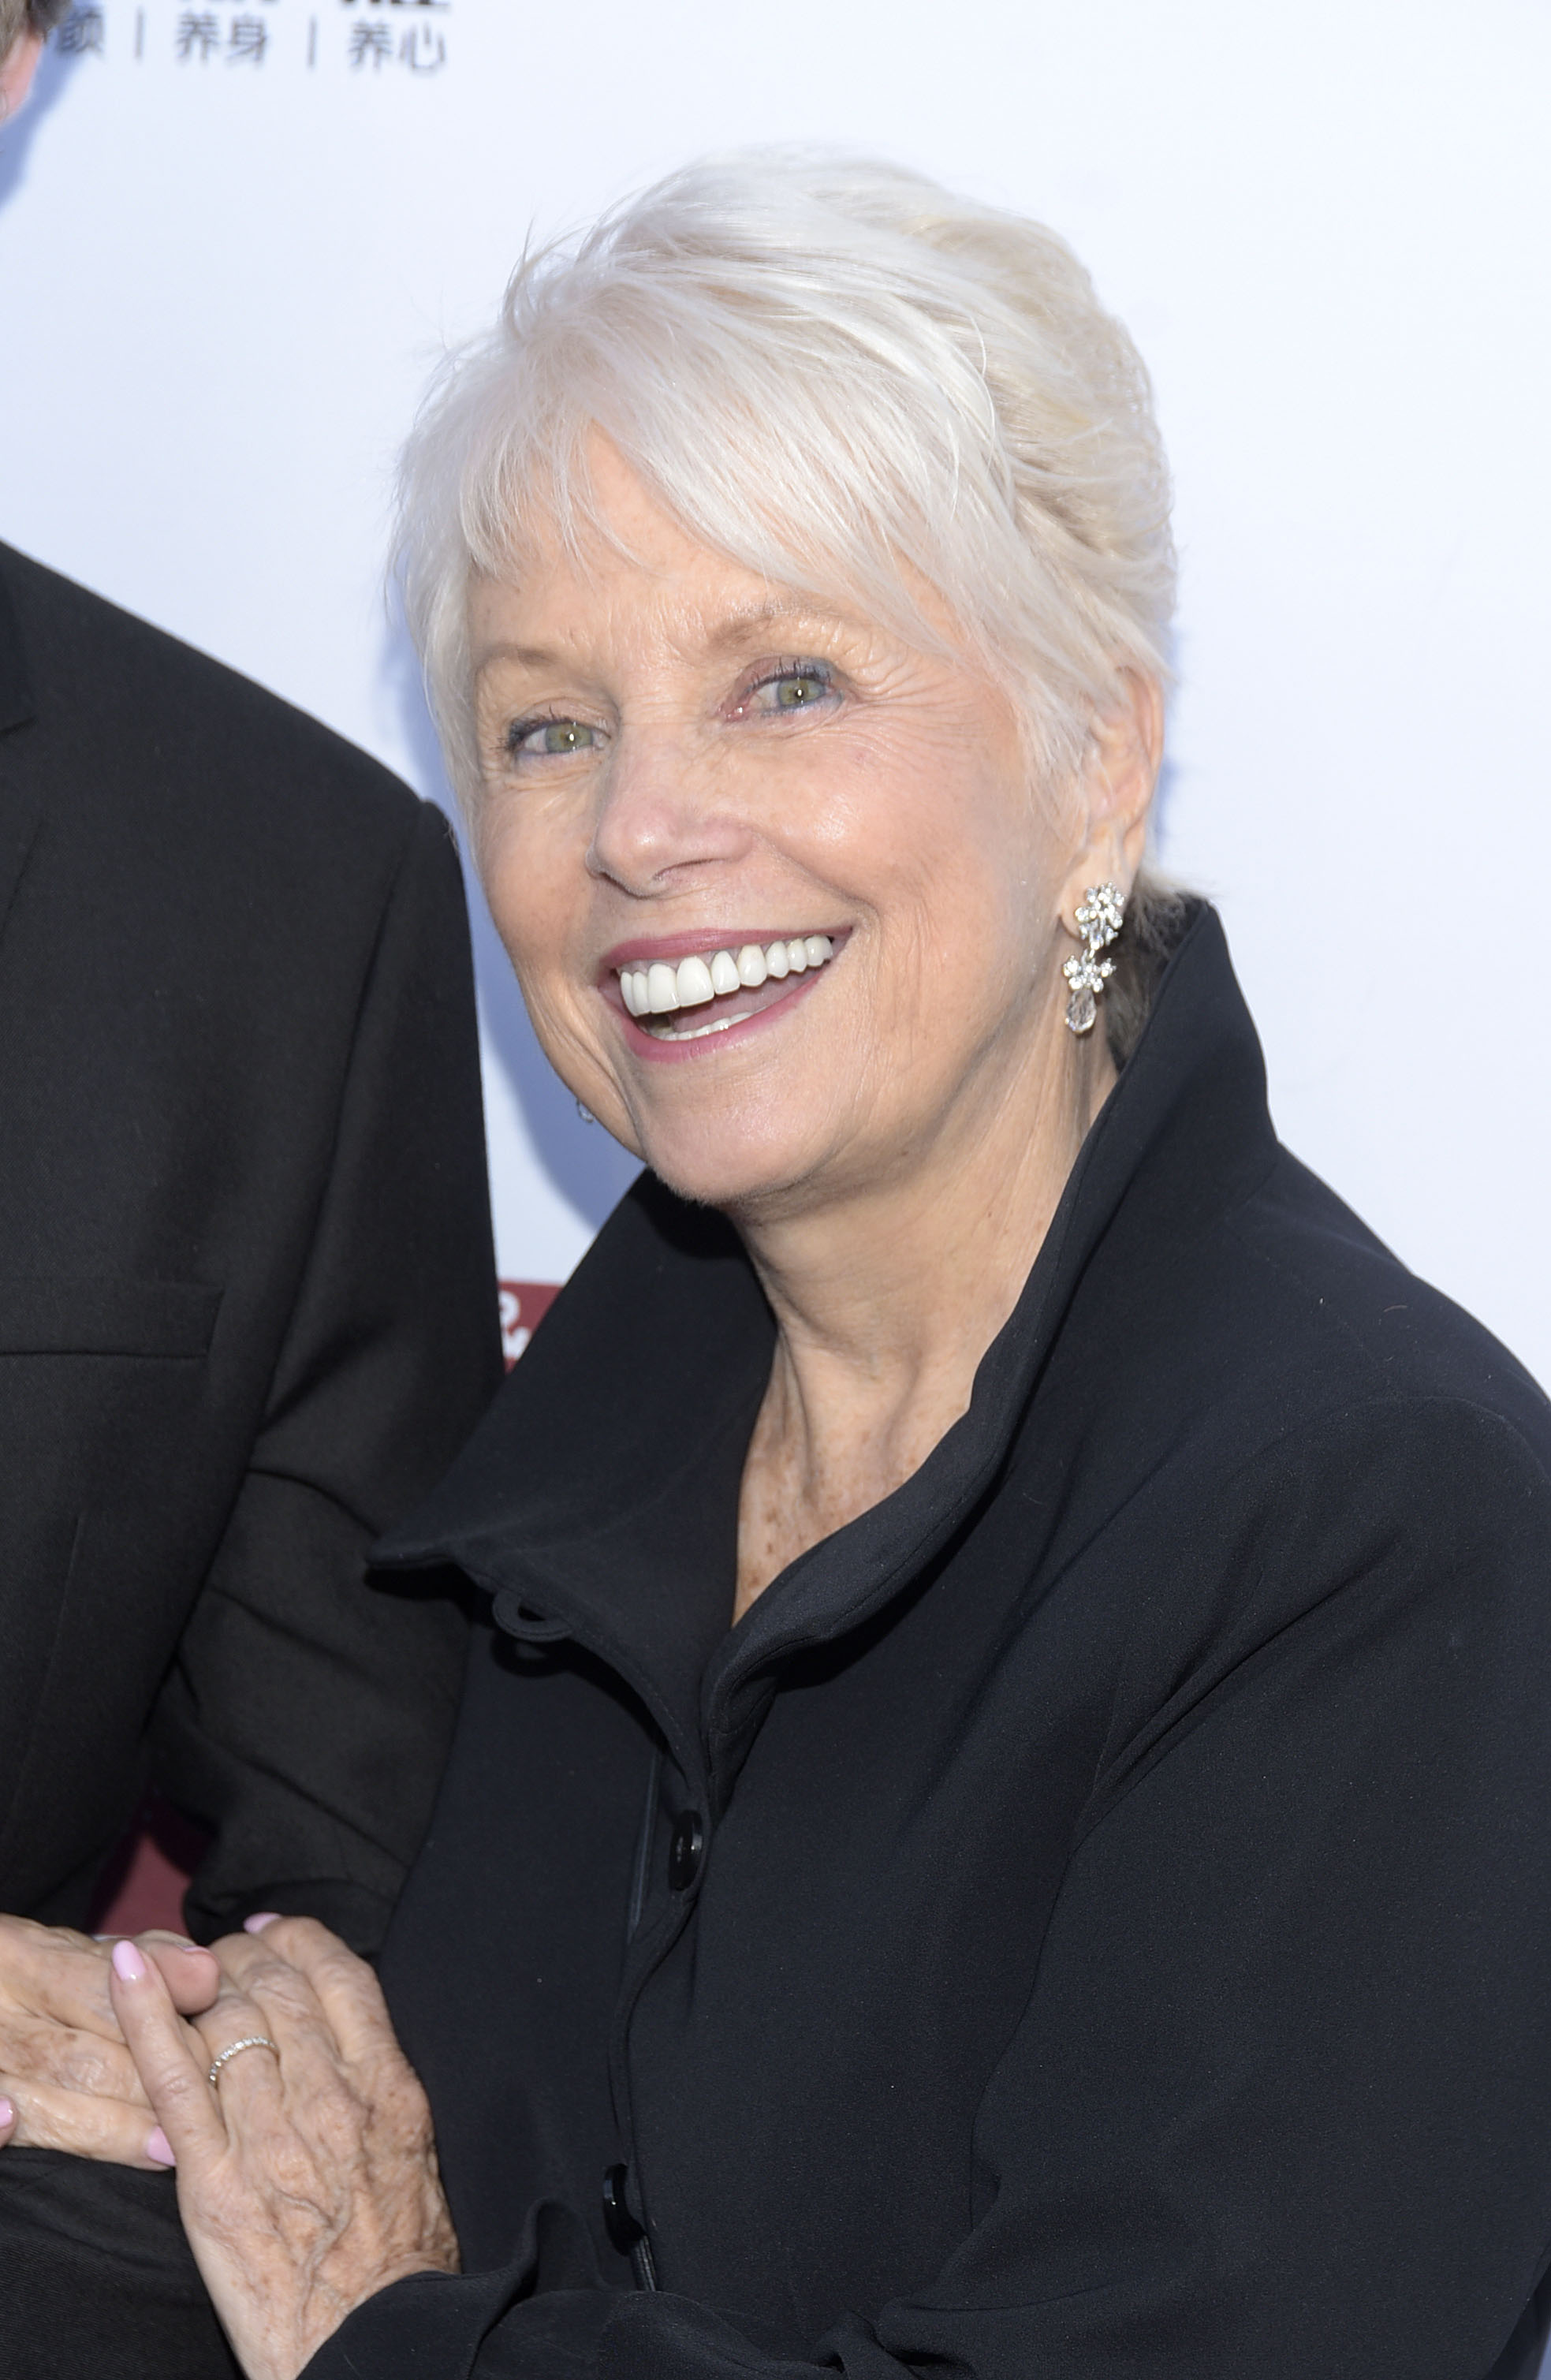 Joyce Bulifant at the 4th annual Roger Neal Oscar Viewing Dinner Icon Awards in Los Angeles, California on February 24, 2019 | Source: Getty Images